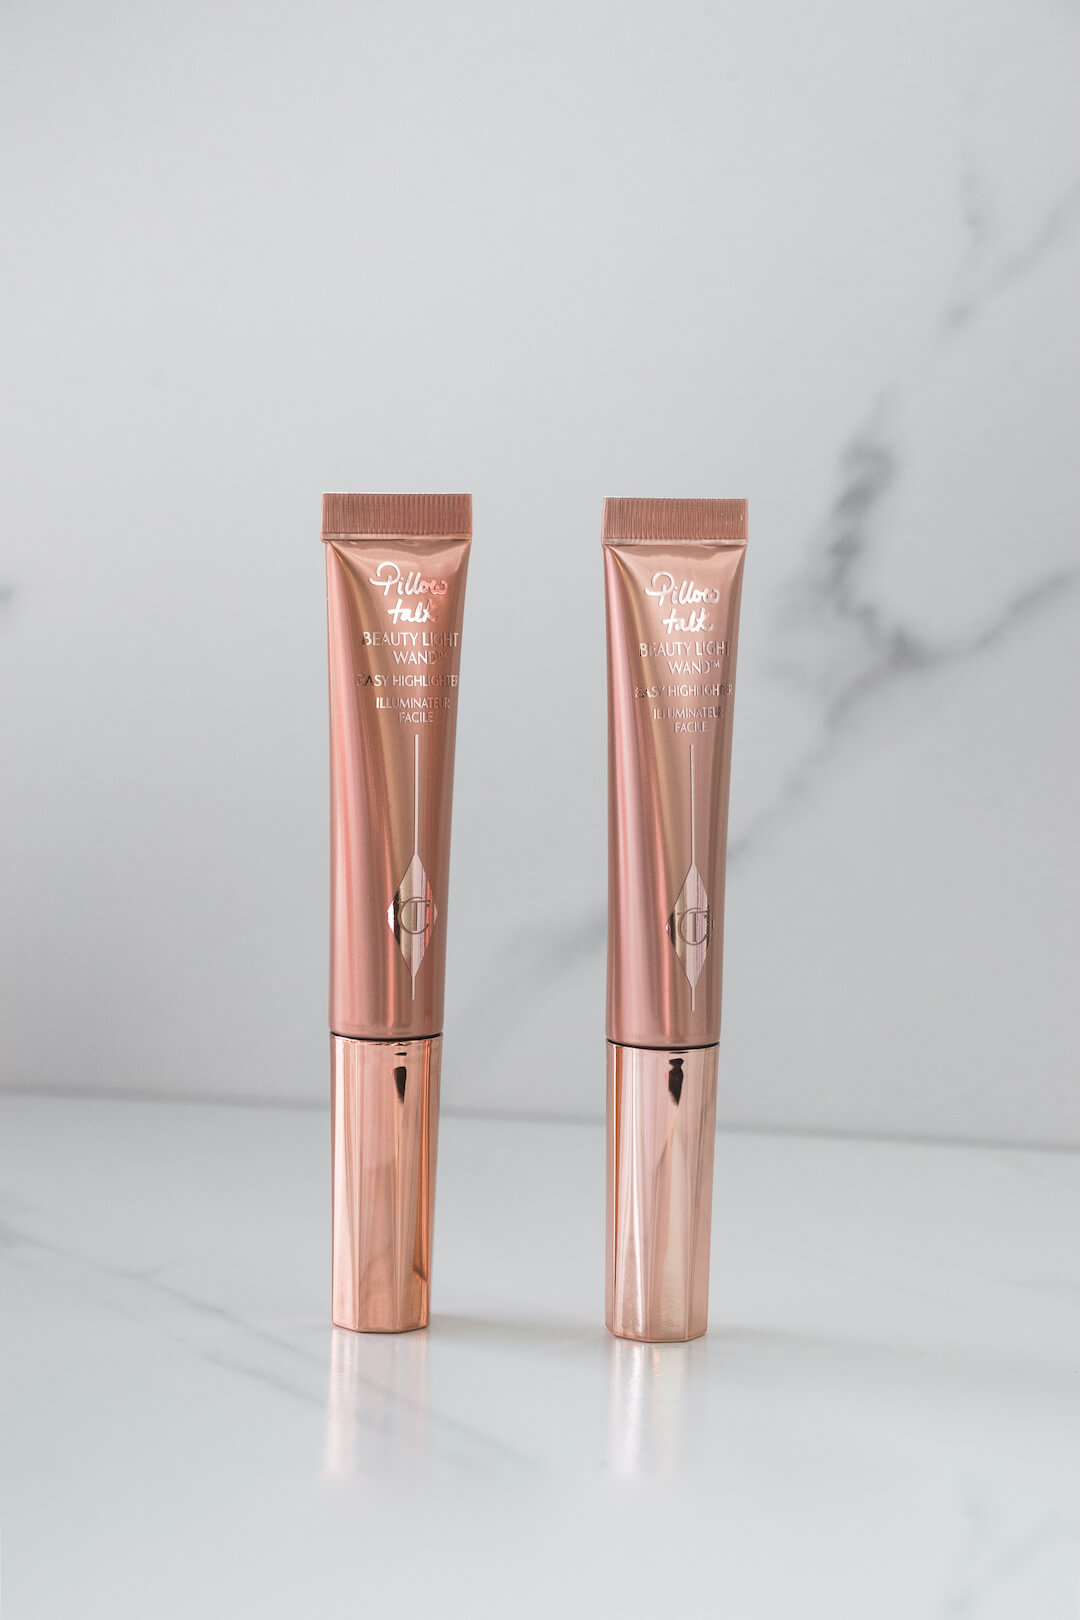 Charlotte Tilbury Pillow Talk Collection Review